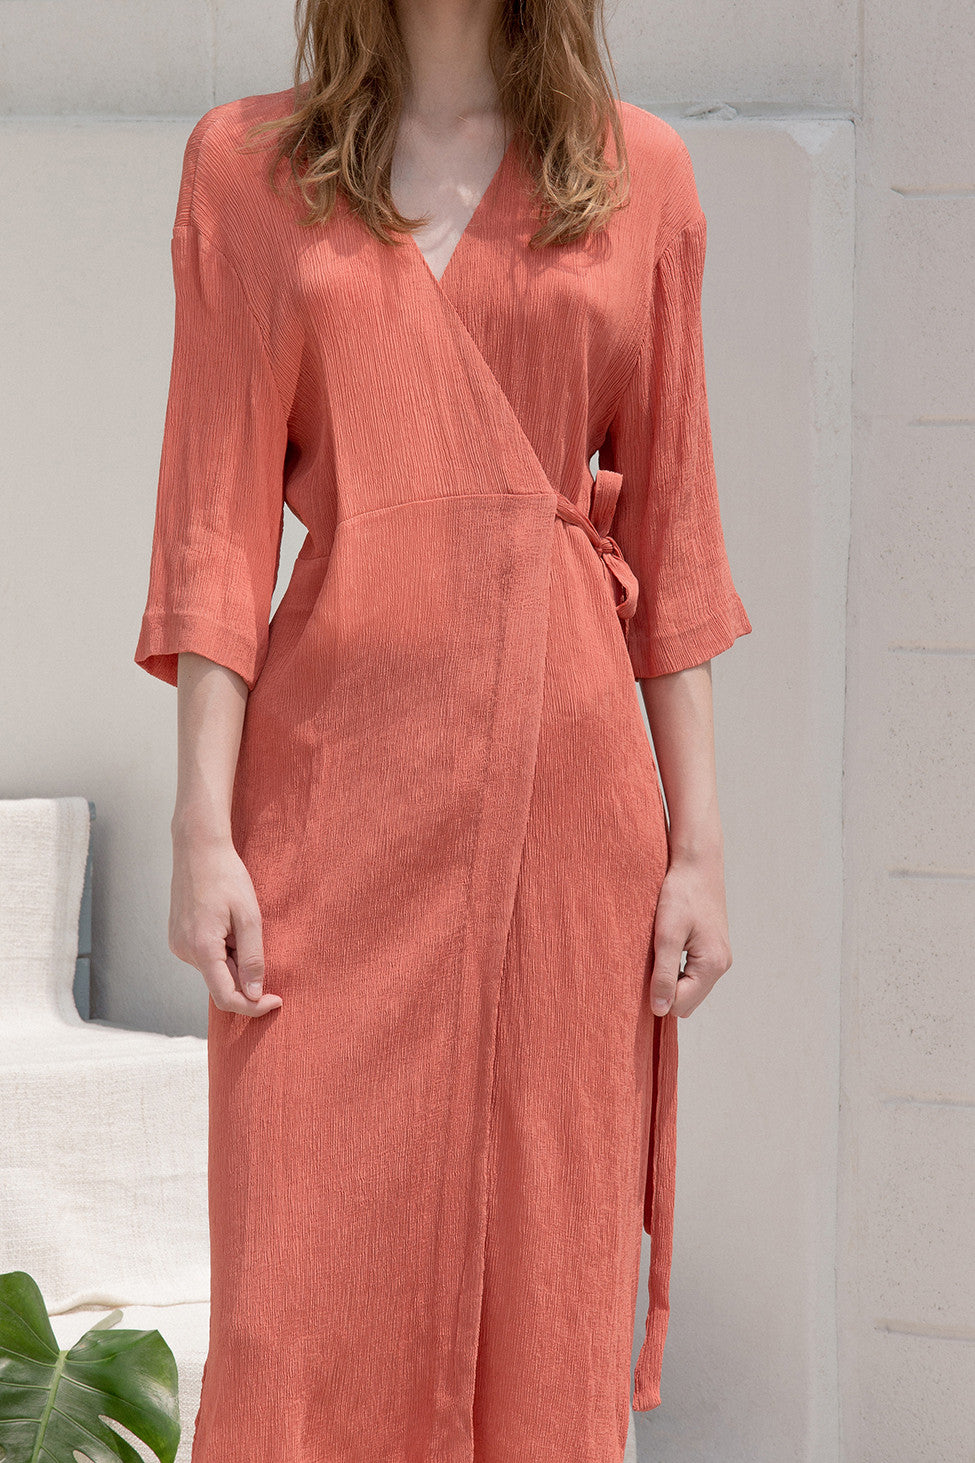 The Corinna pleats dress in wrap front with sash belt, side slits, quarter sleeves. Pull on.